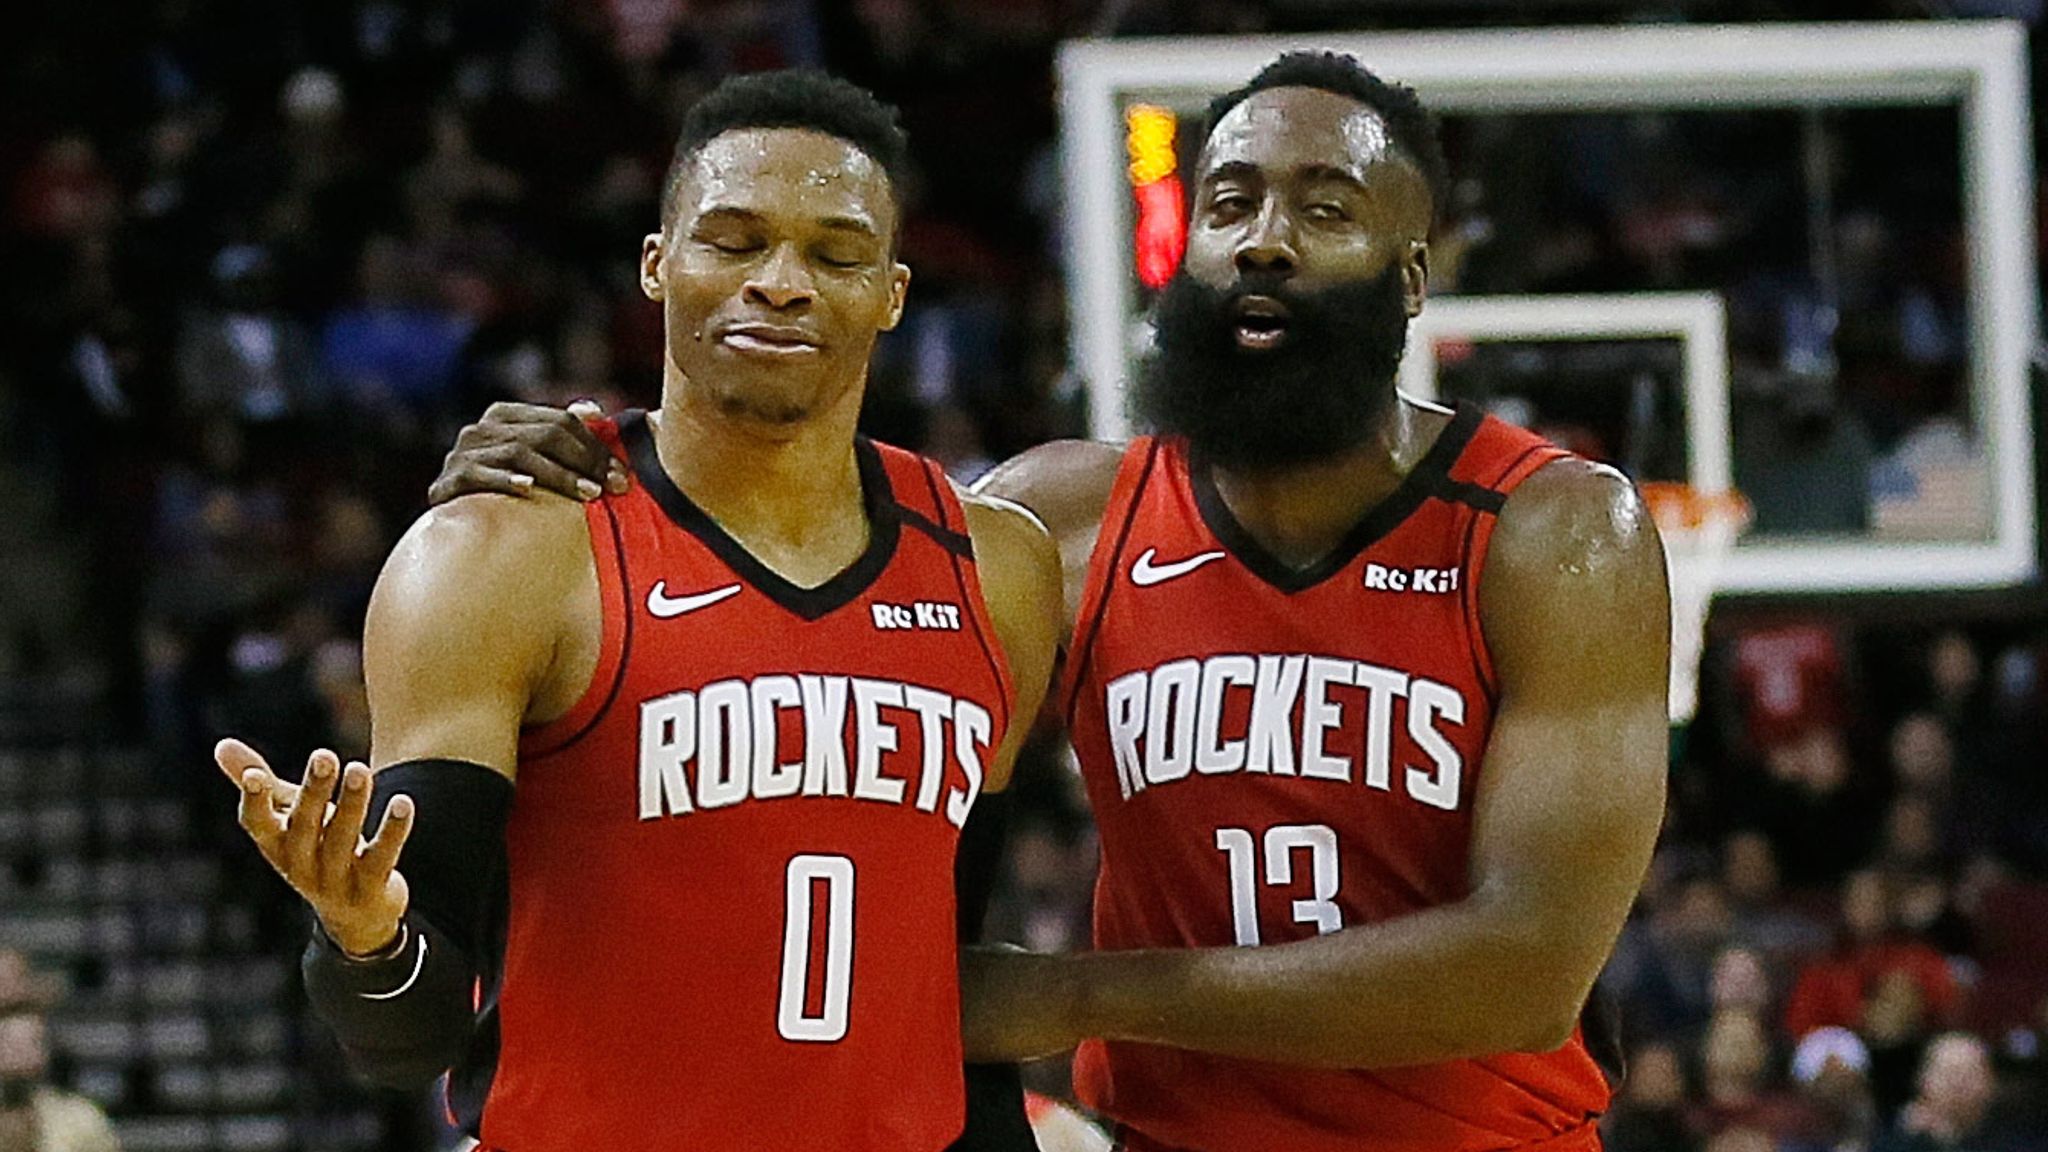 Houston Rockets - Houston Rockets updated their cover photo.